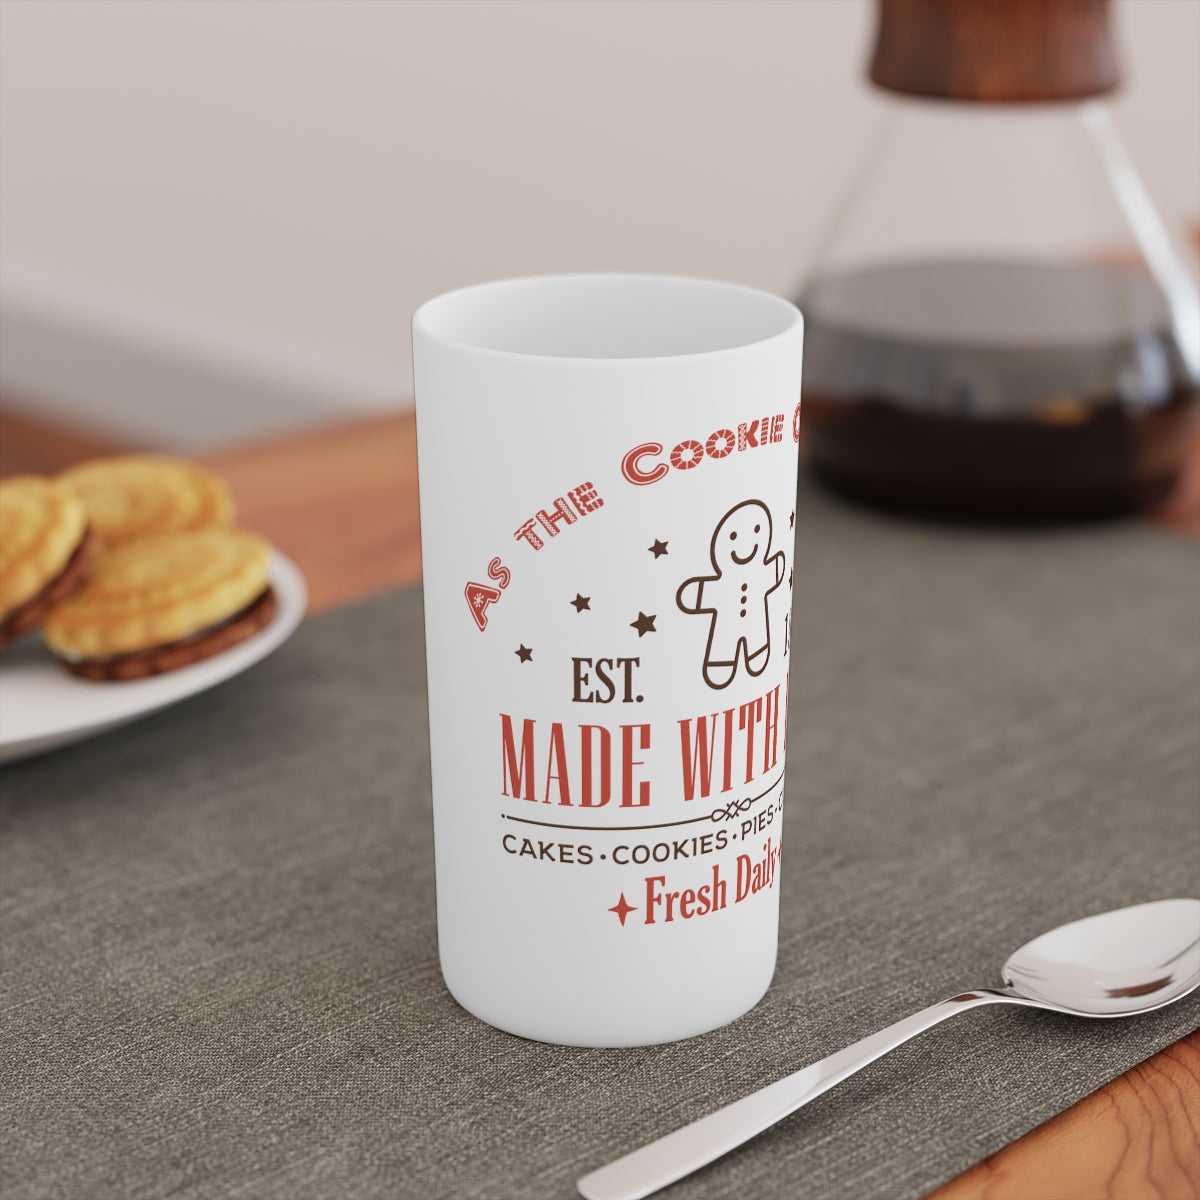 As the Cookie Crumbles Conical Coffee Mugs